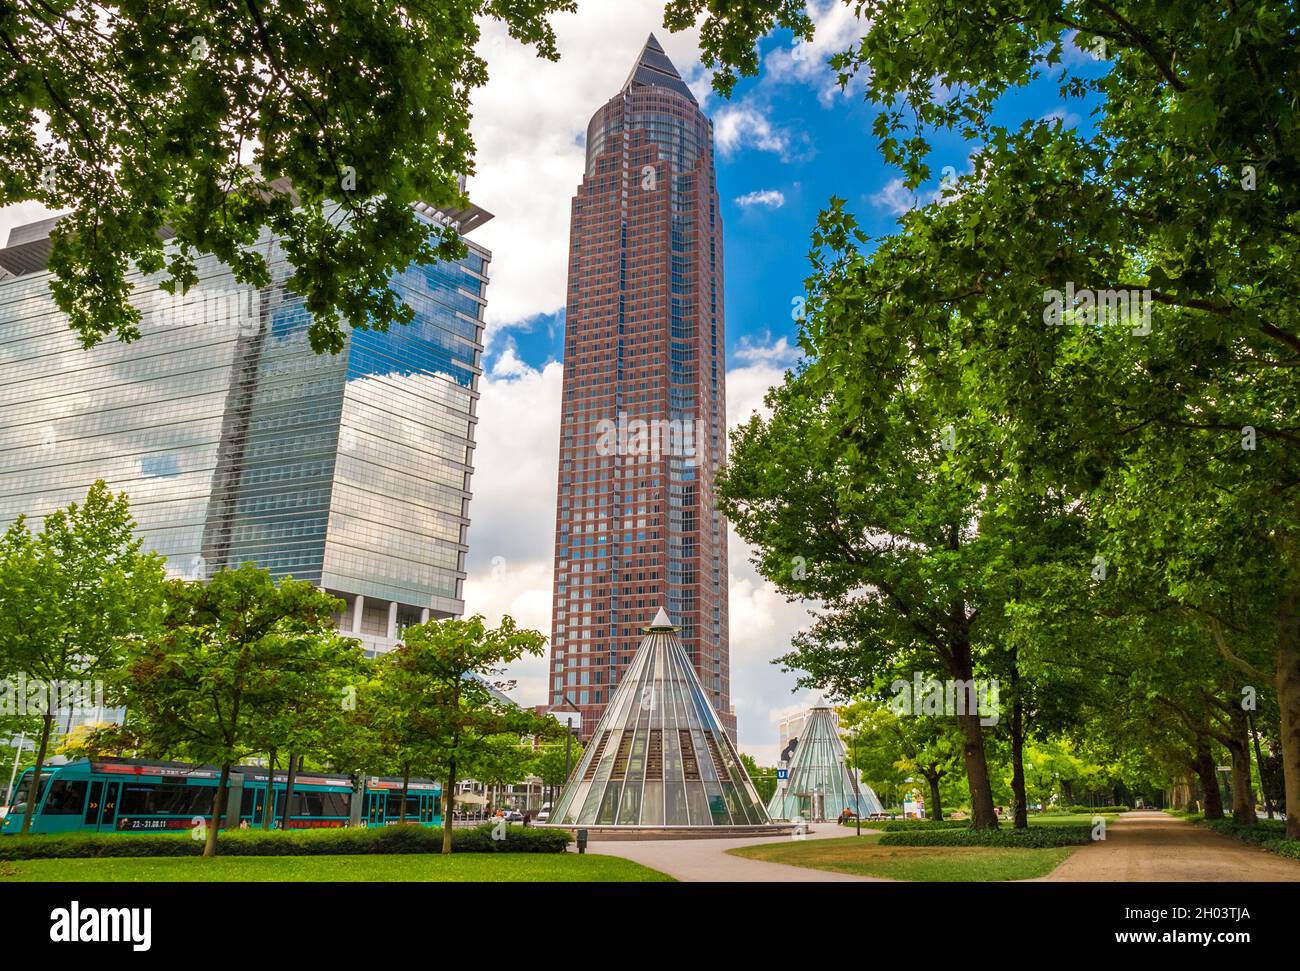 Lovely view of the famous Messeturm, or Trade Fair Tower, a skyscraper in the Westend-Süd district of Frankfurt, Germany seen from the park Ludwig... Stock Photo